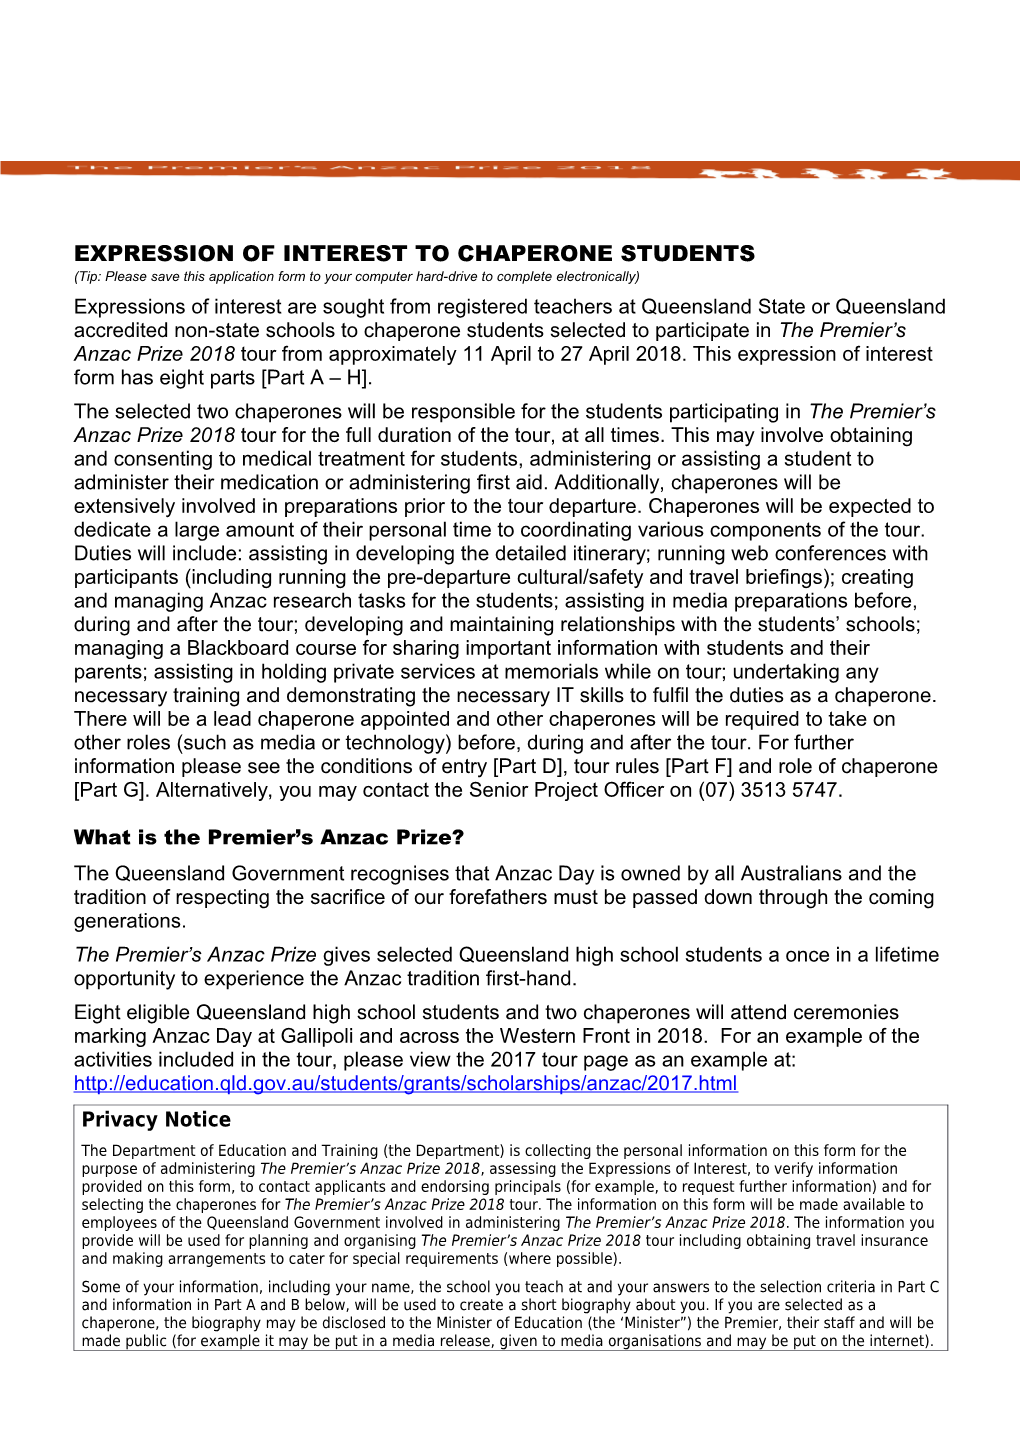 Expression of Interest to Chaperone Students